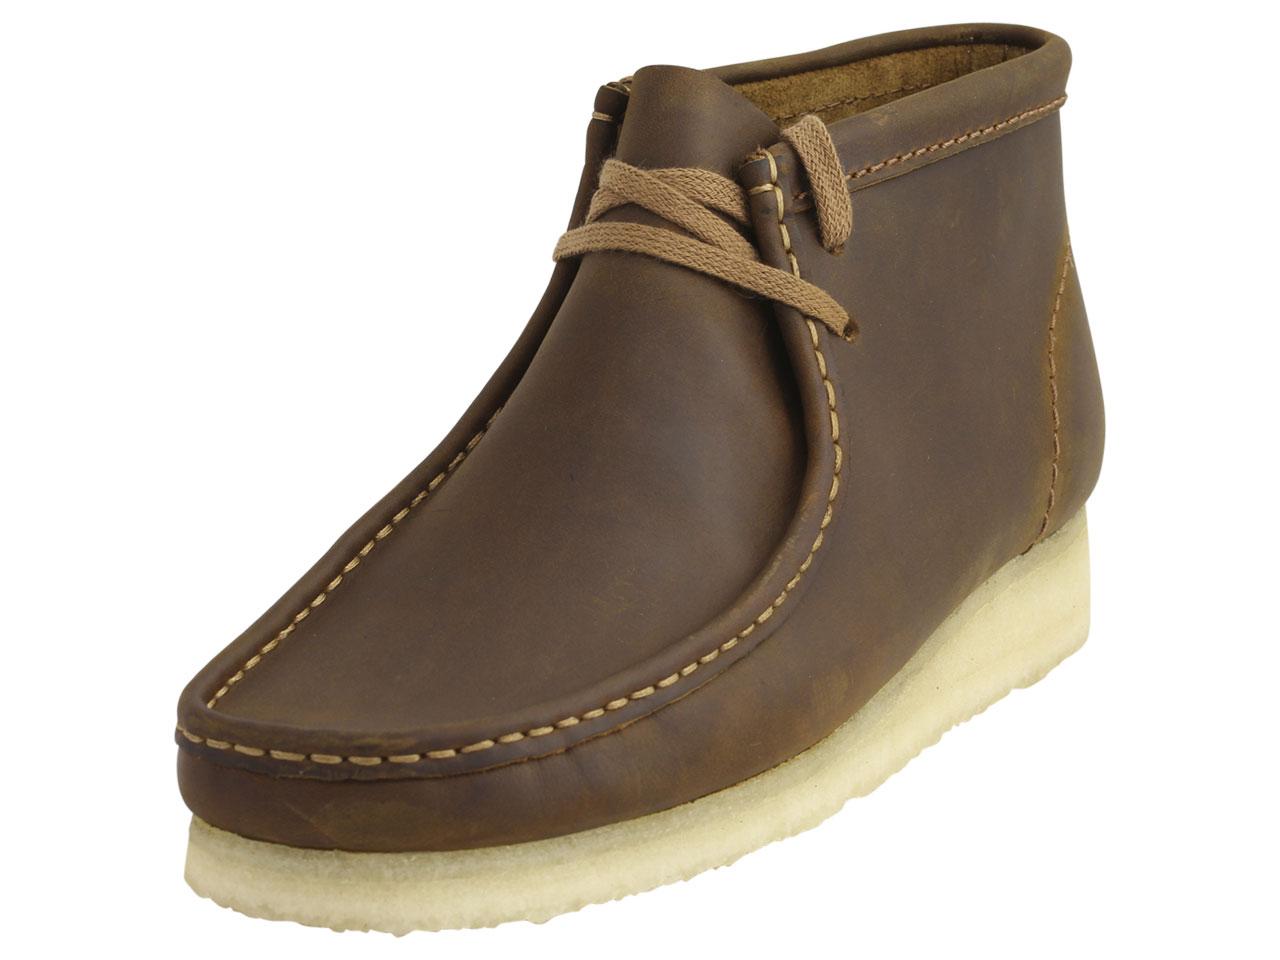 Clarks Originals Men's Wallabee Chukka Boots Shoes - Beeswax Leather 26134196 - 10.5 D(M) US